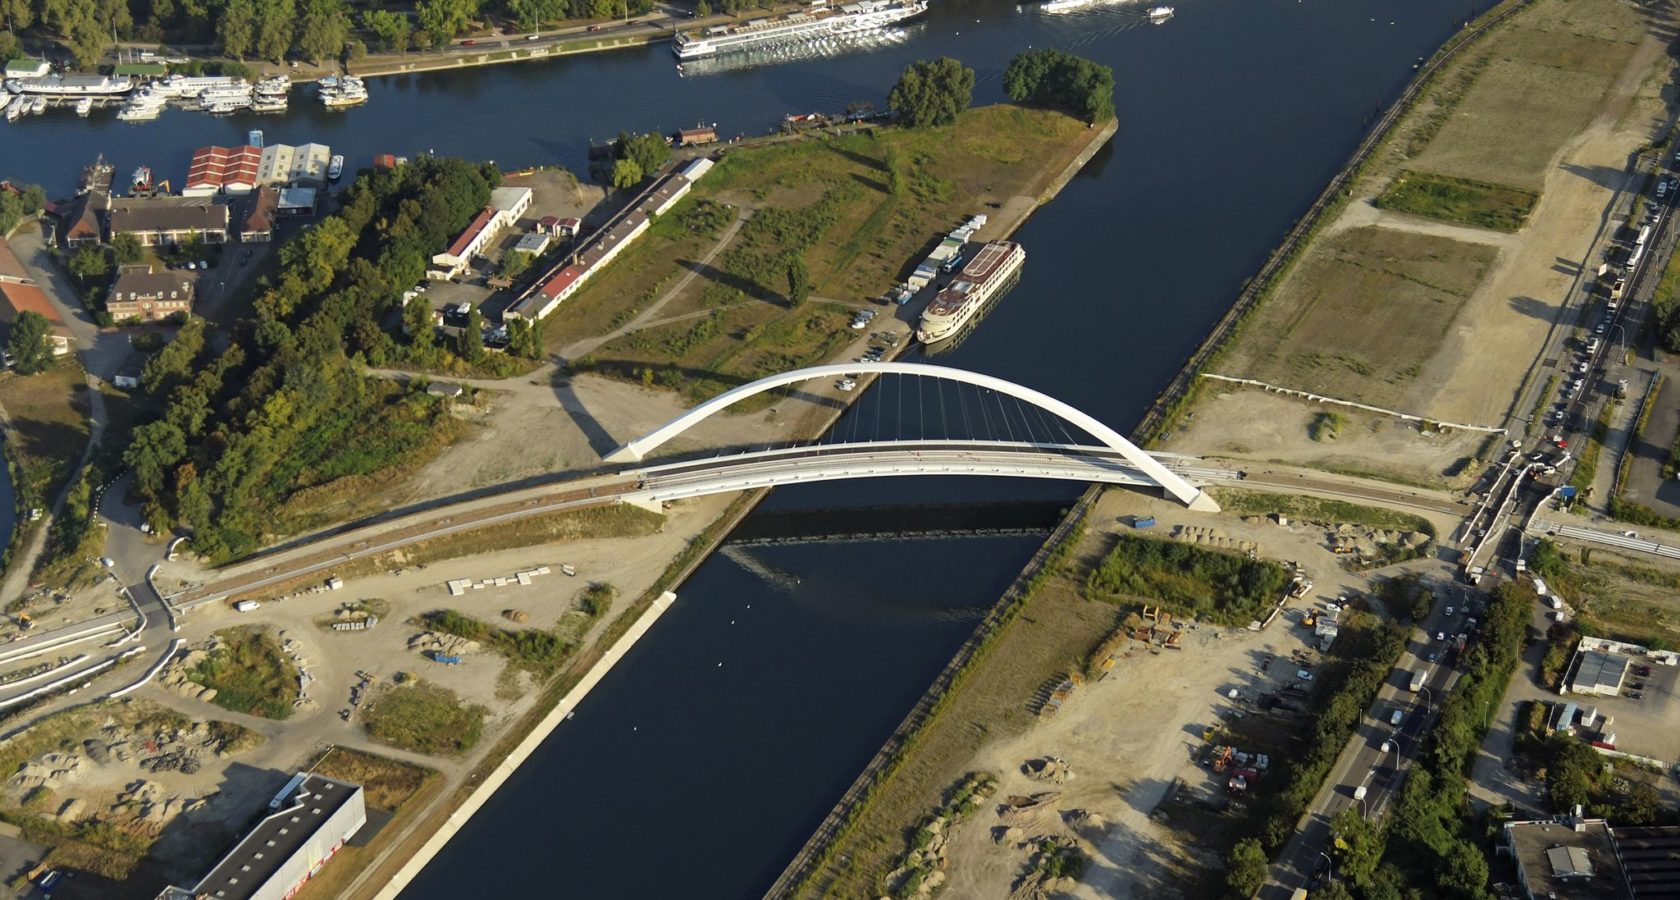 Aerial view of the André Bord bridge in the Citadelle district. Photo credit: Jean Isenmann, ADEUS